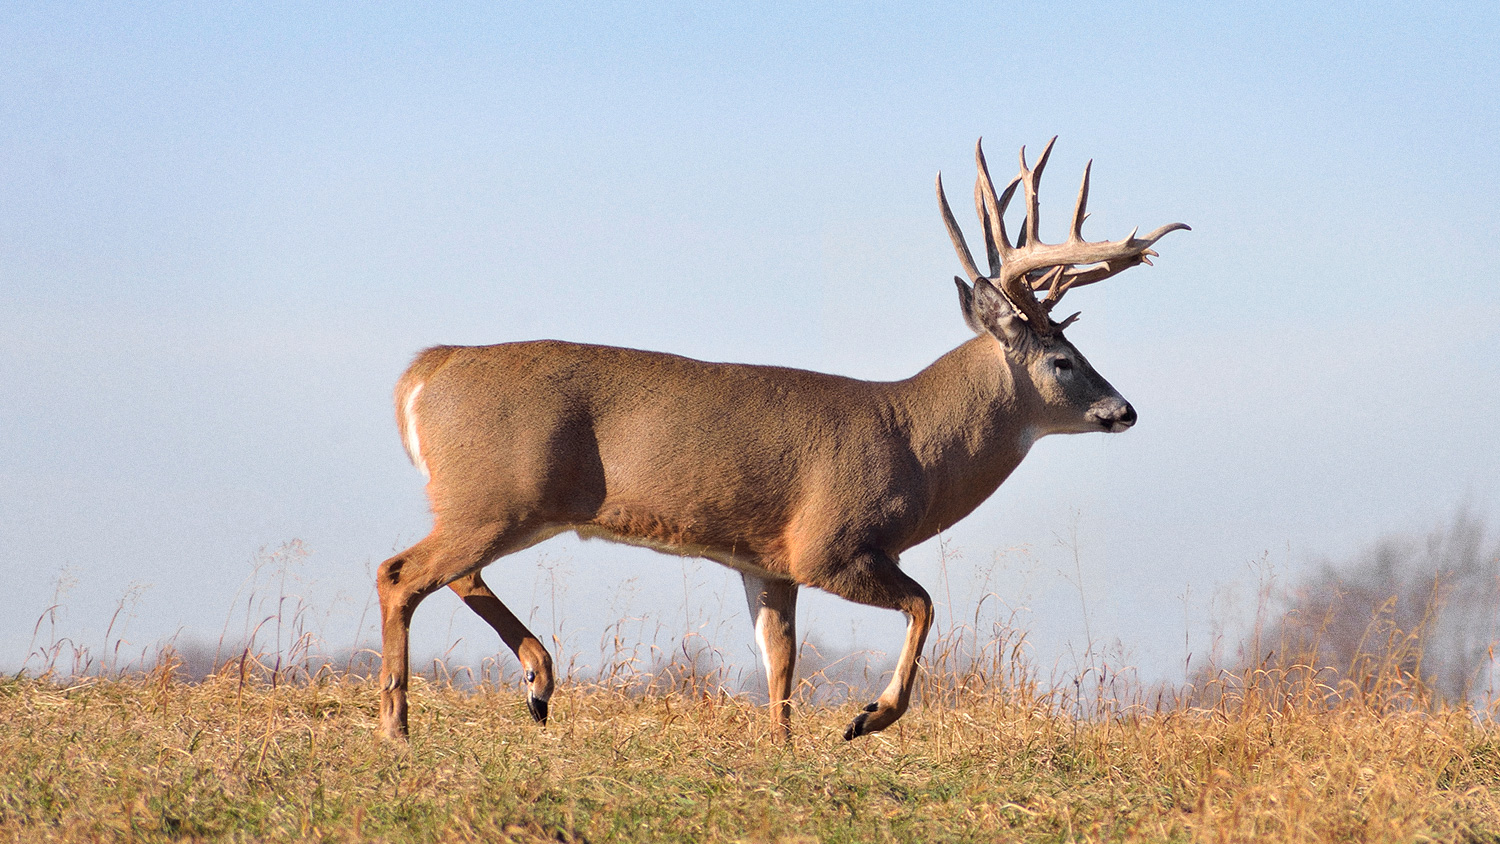 Oklahoma Deer Hunt, Travel Day An Official Journal Of The NRA